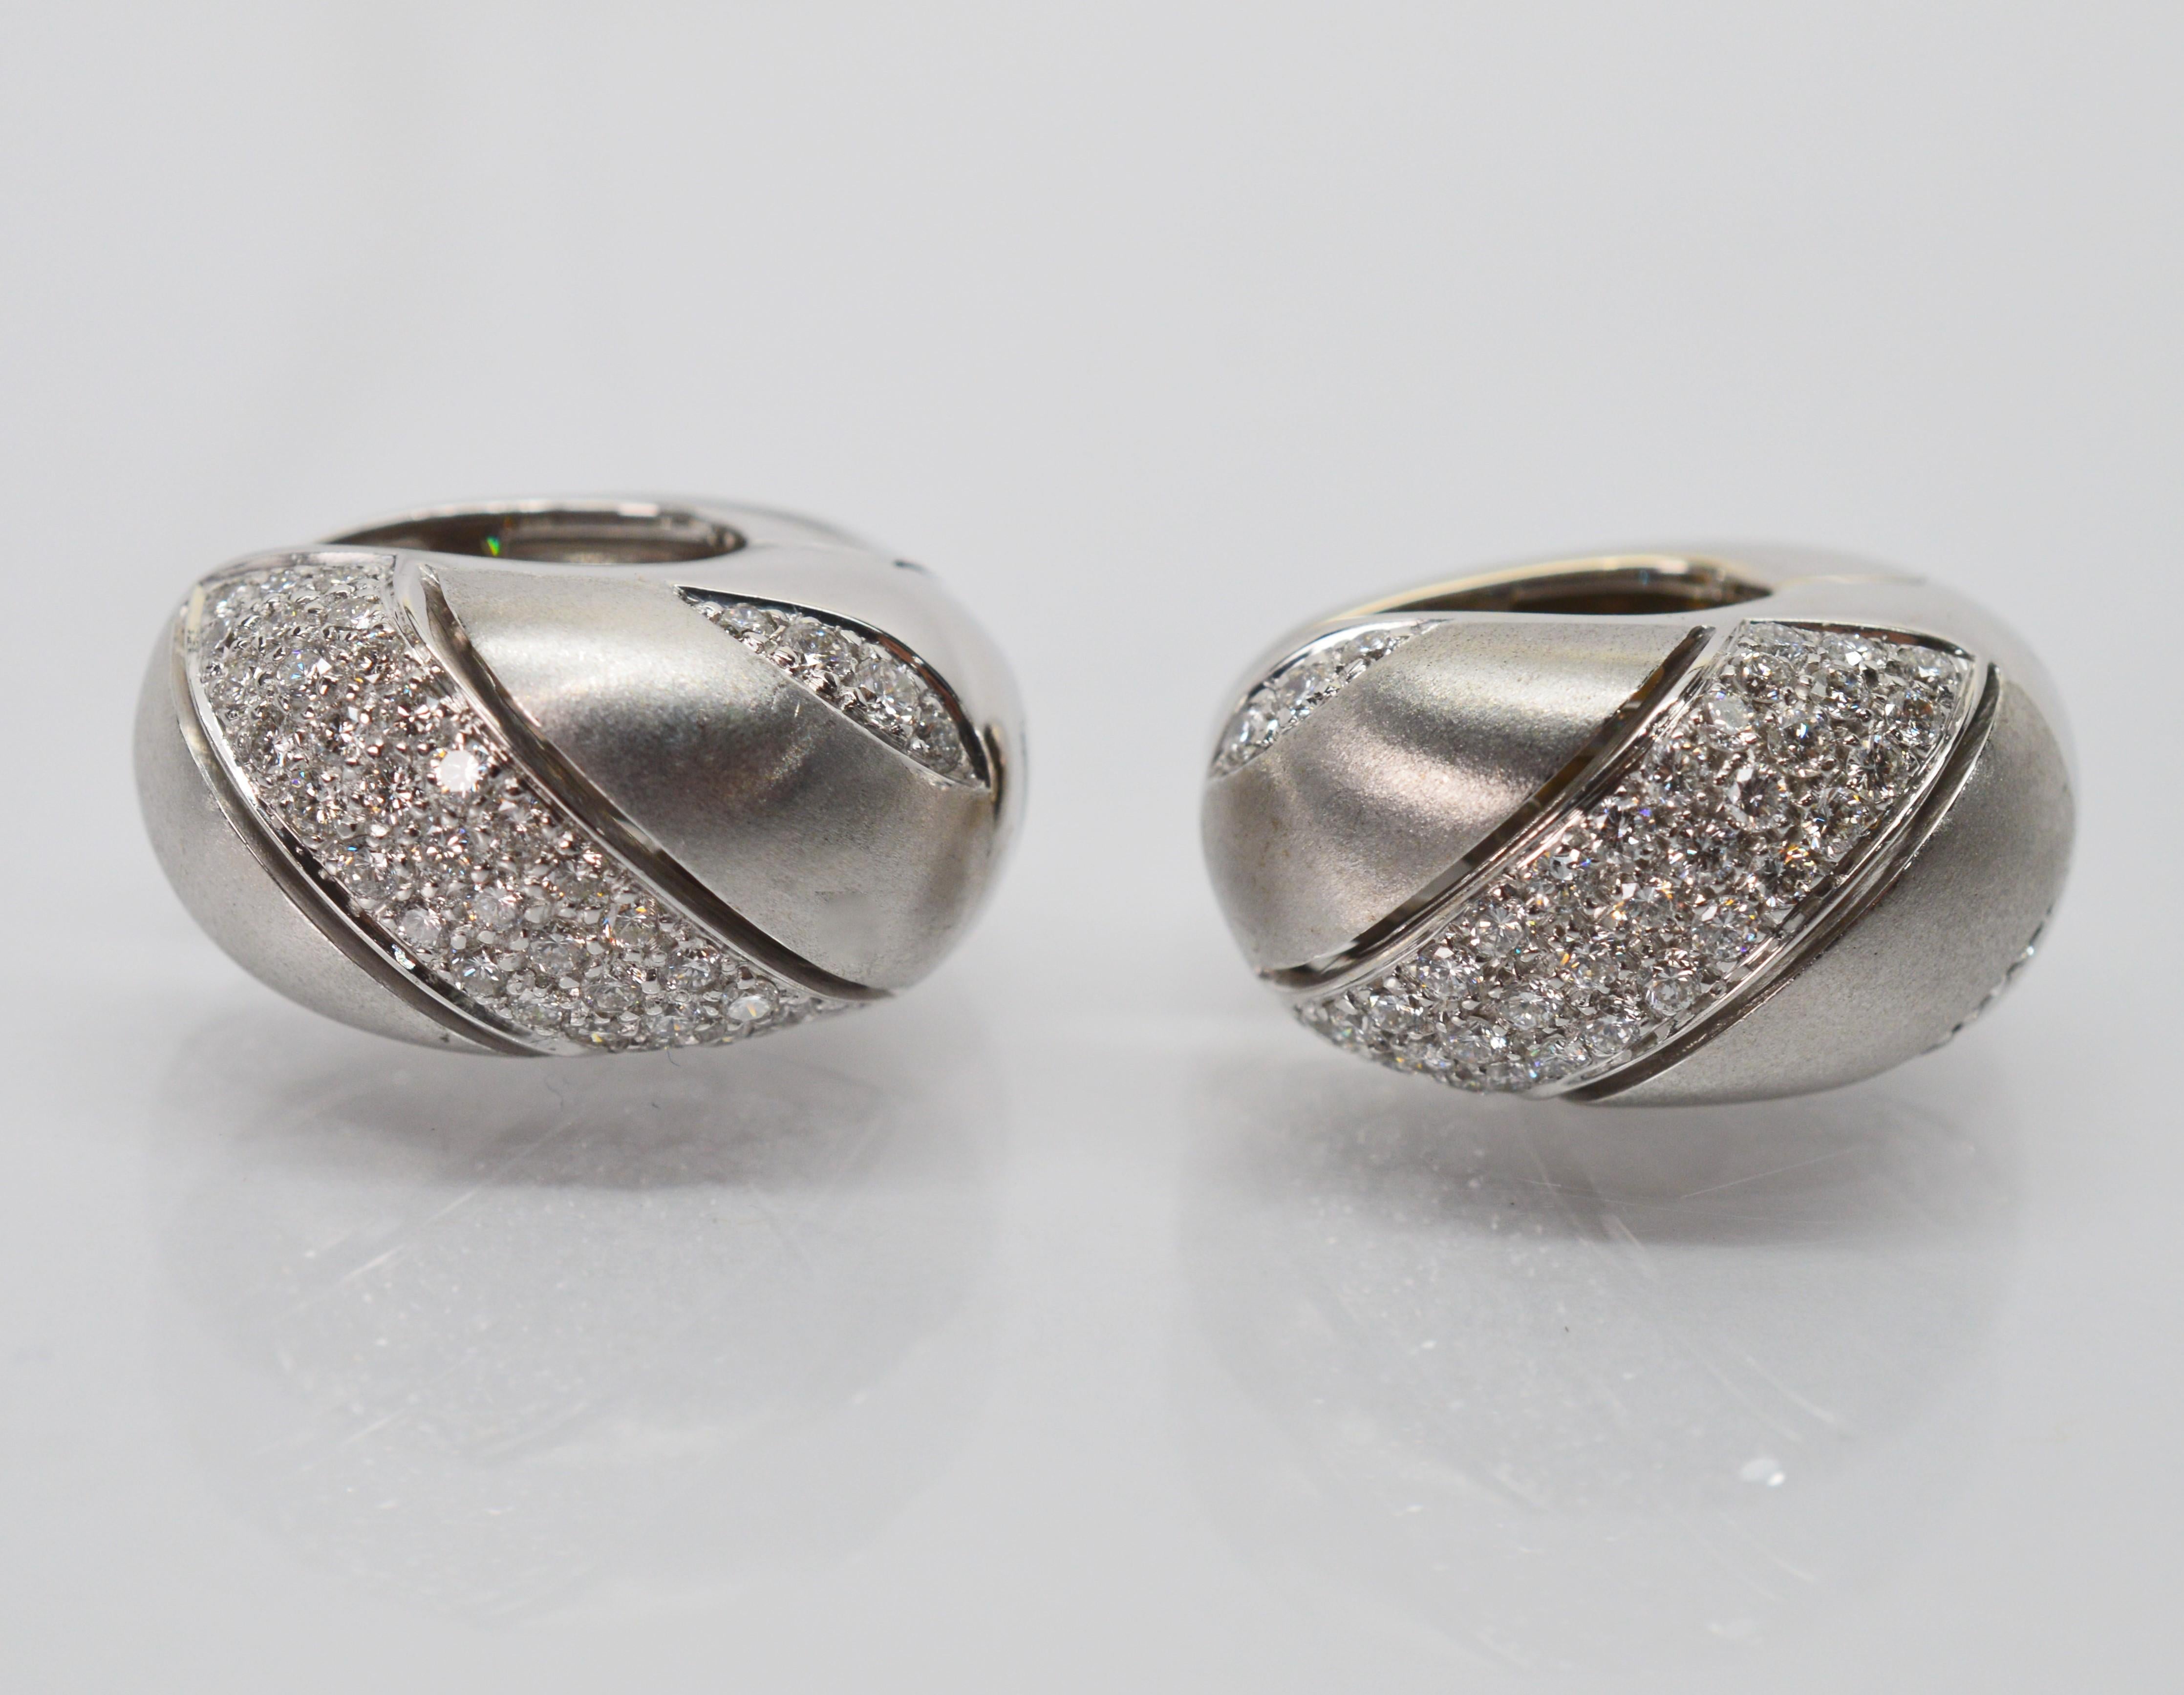 A ribbon of diamonds flashes across the satin finished eighteen karat (18K) white gold of these quality Italian made huggie hoop style earrings giving them a regal look. Ninety-four H/VS round diamonds weighing almost a carat illuminates this pair